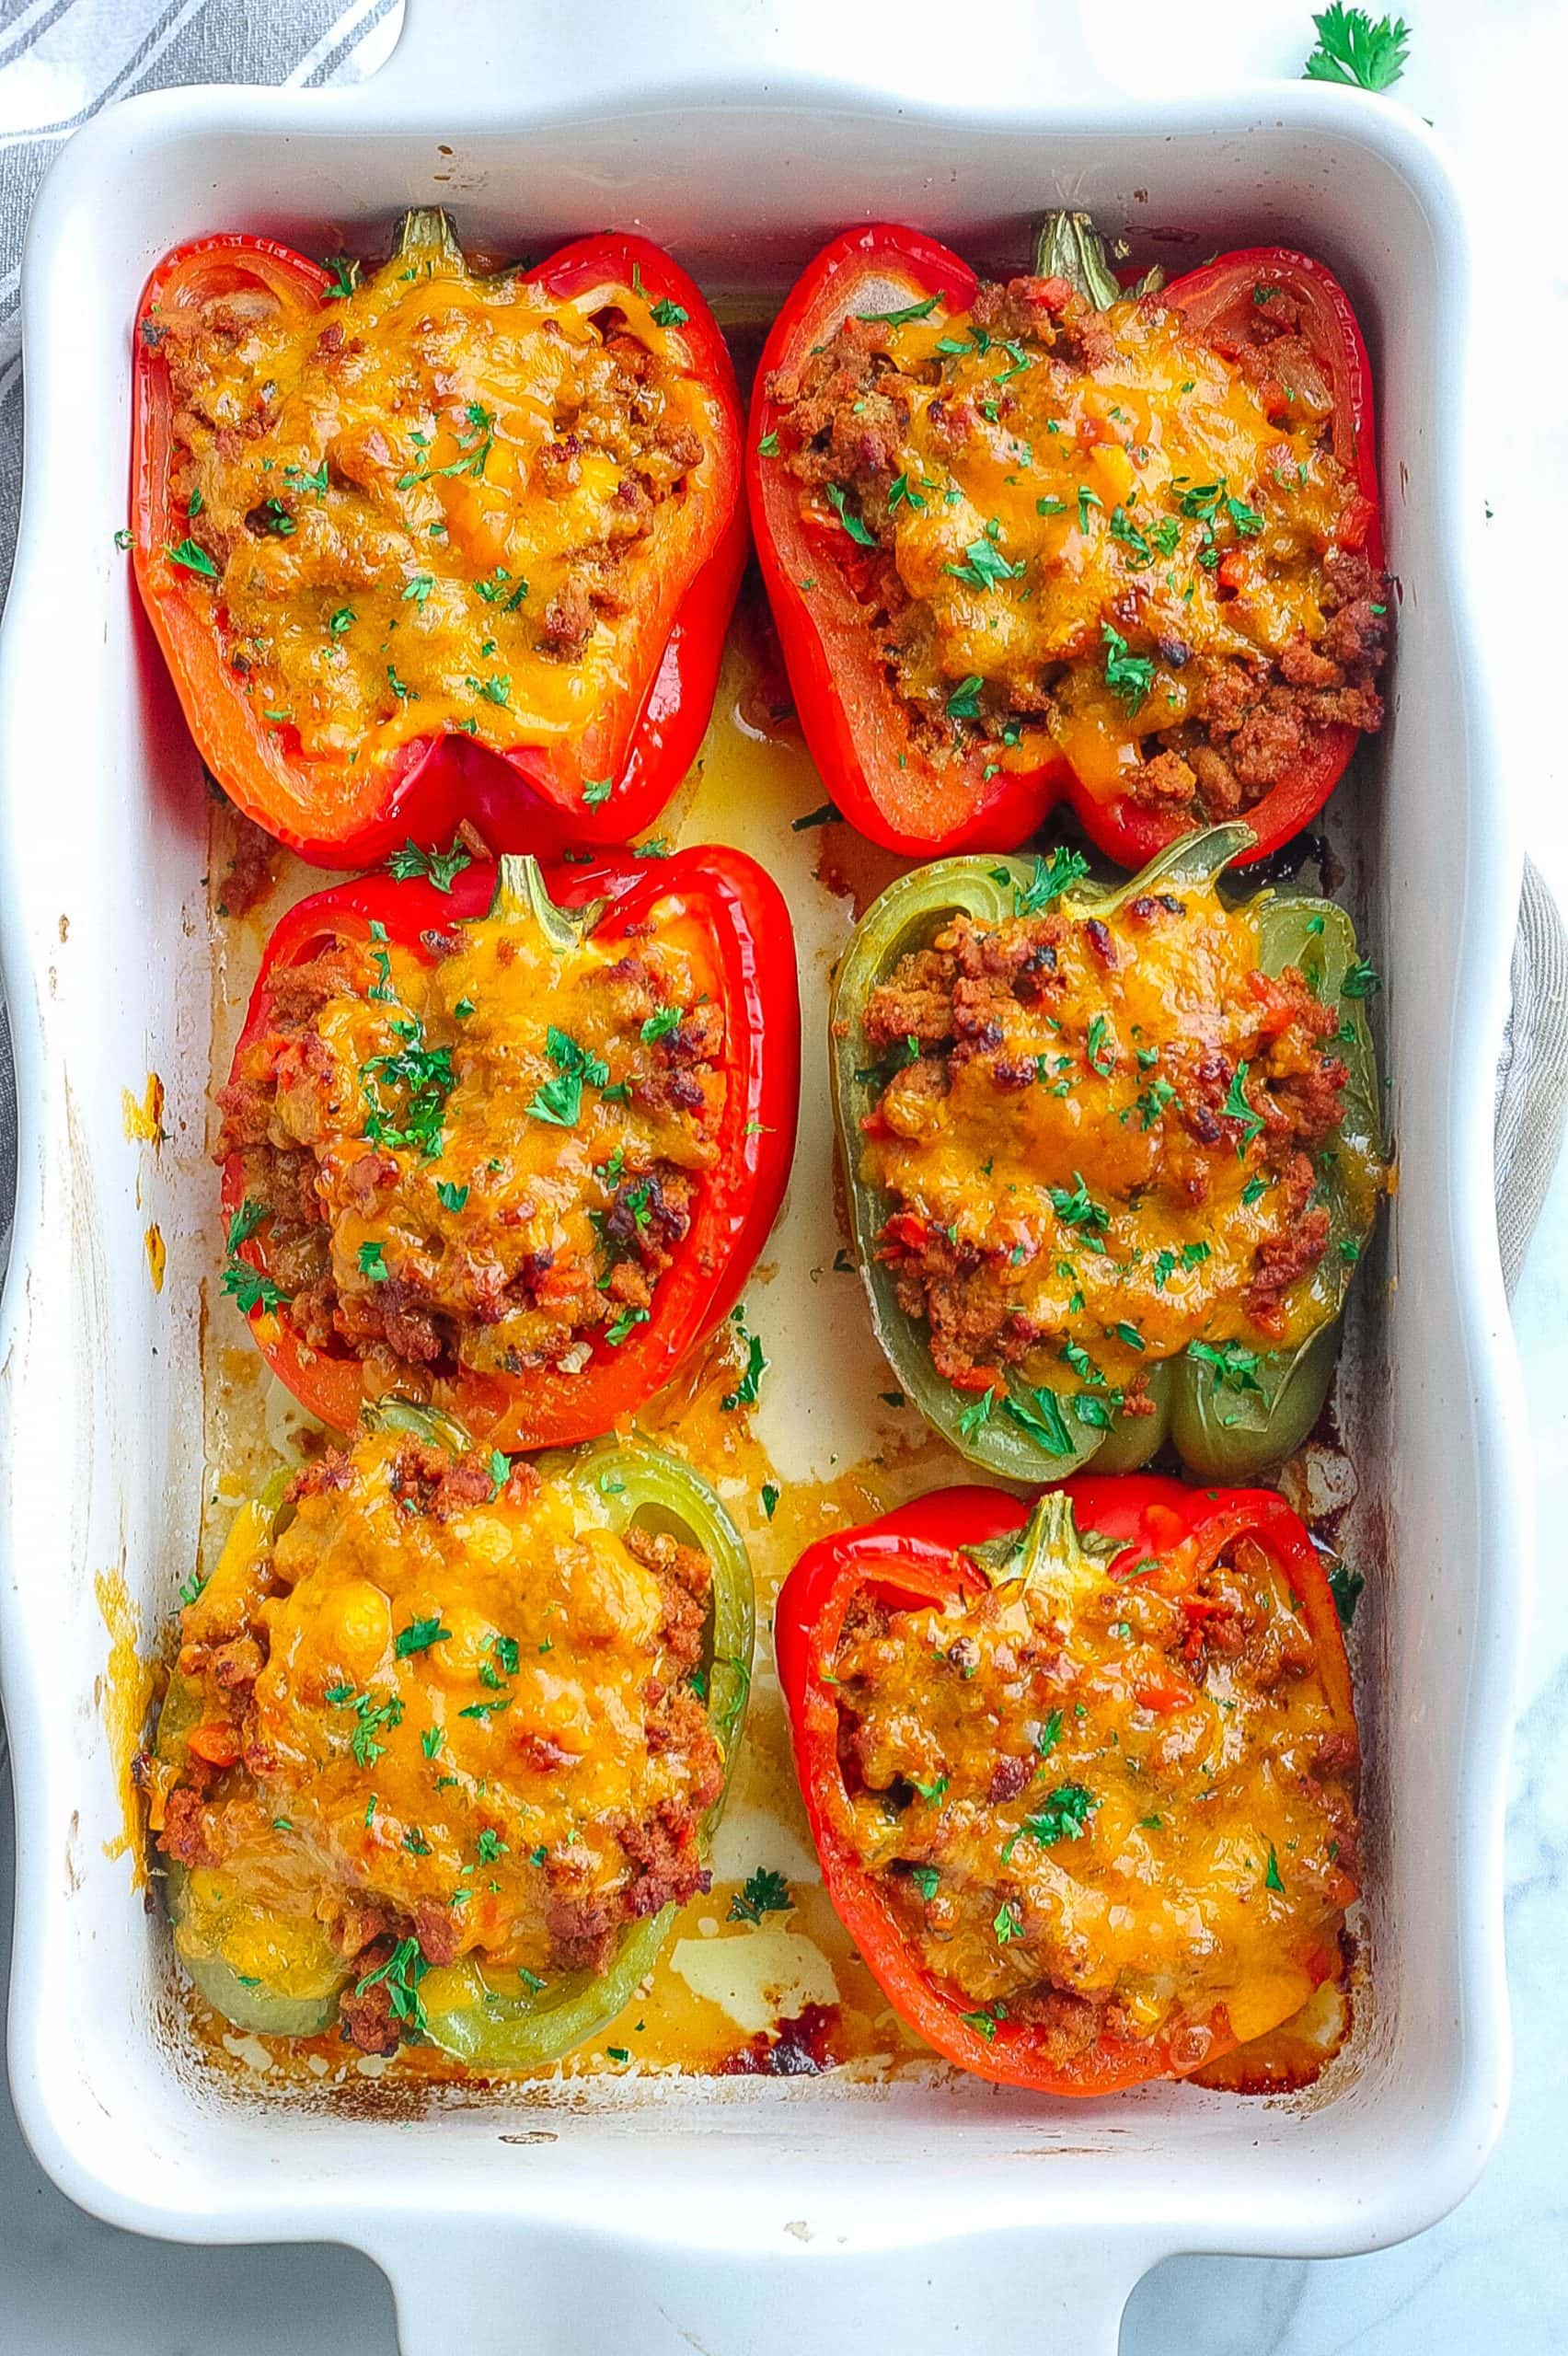 sloppy joe stuffed bell peppers with cheese